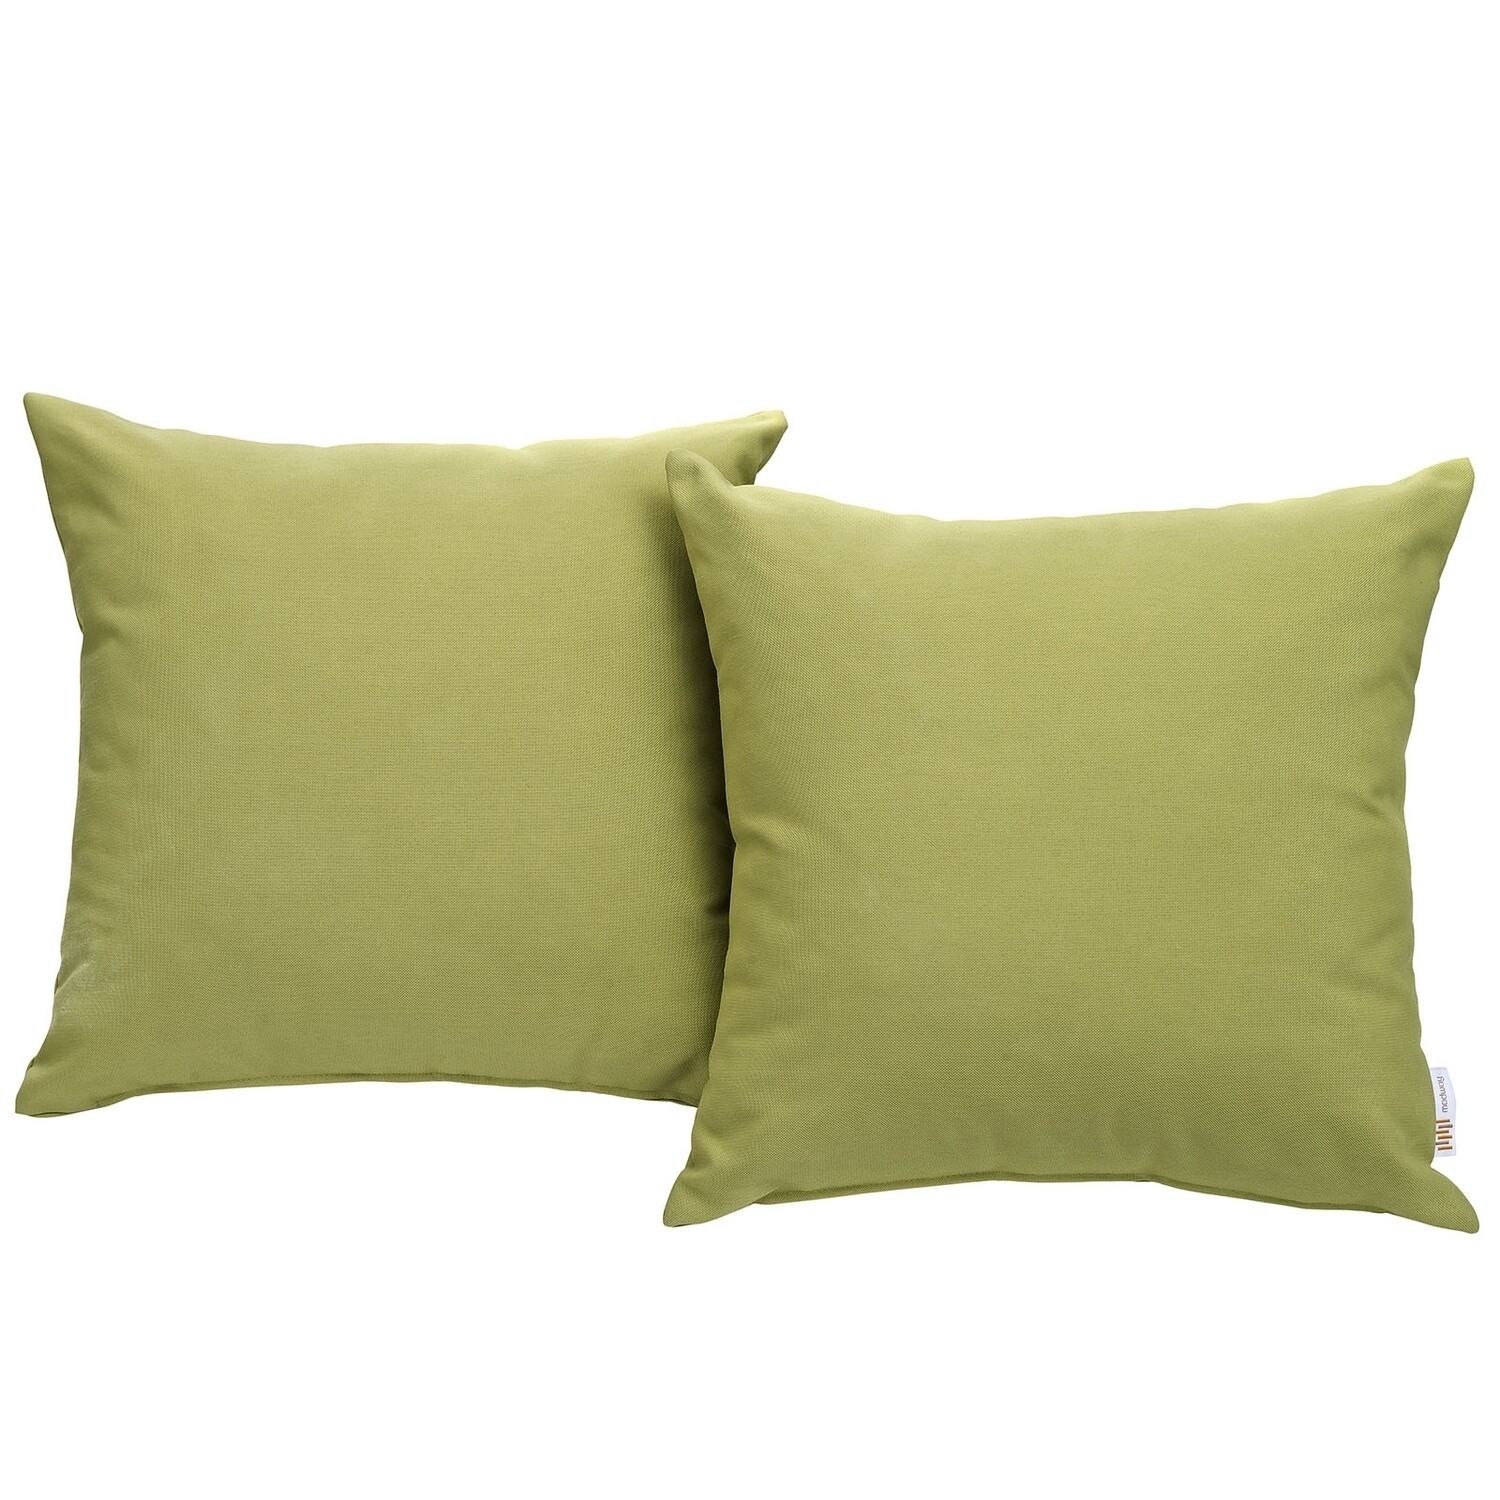 Hinsdale Patio 2 Piece Pillow Set  17" x 17" in Peridot